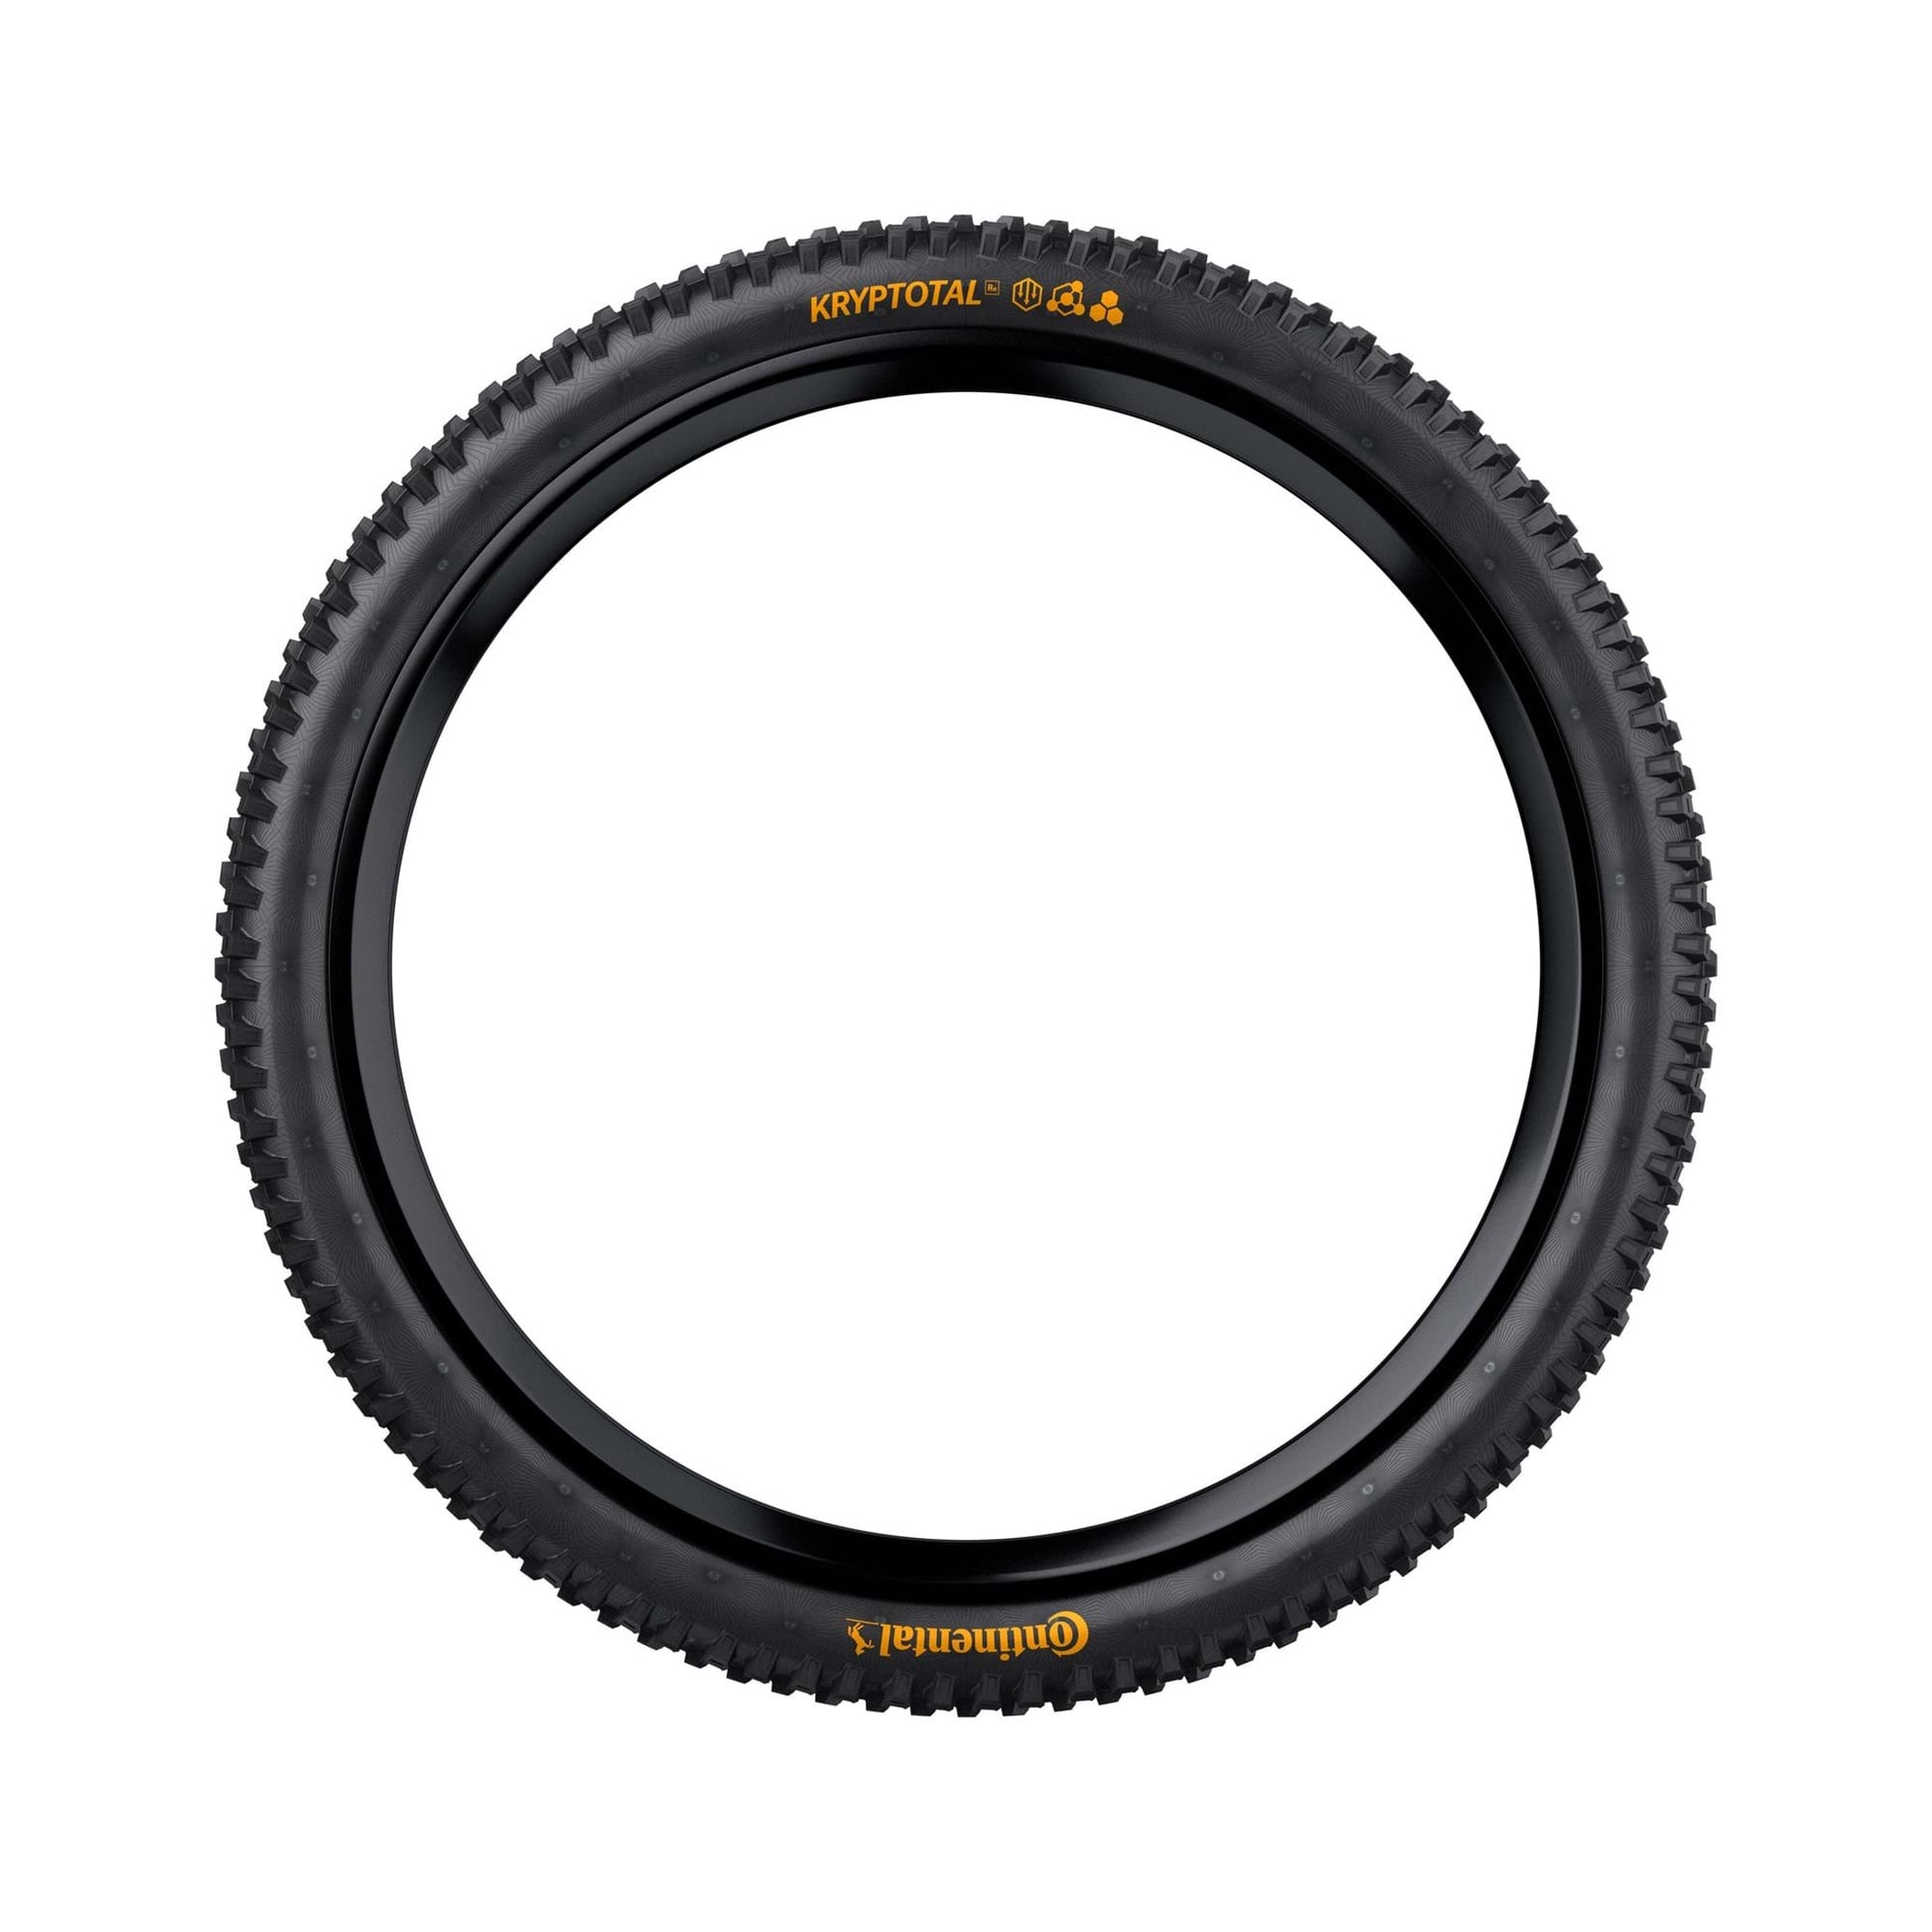 CONTINENTAL KRYPTOTAL-FR DOWNHILL 29X2.40" SUPERSOFT FOLDING TYRE